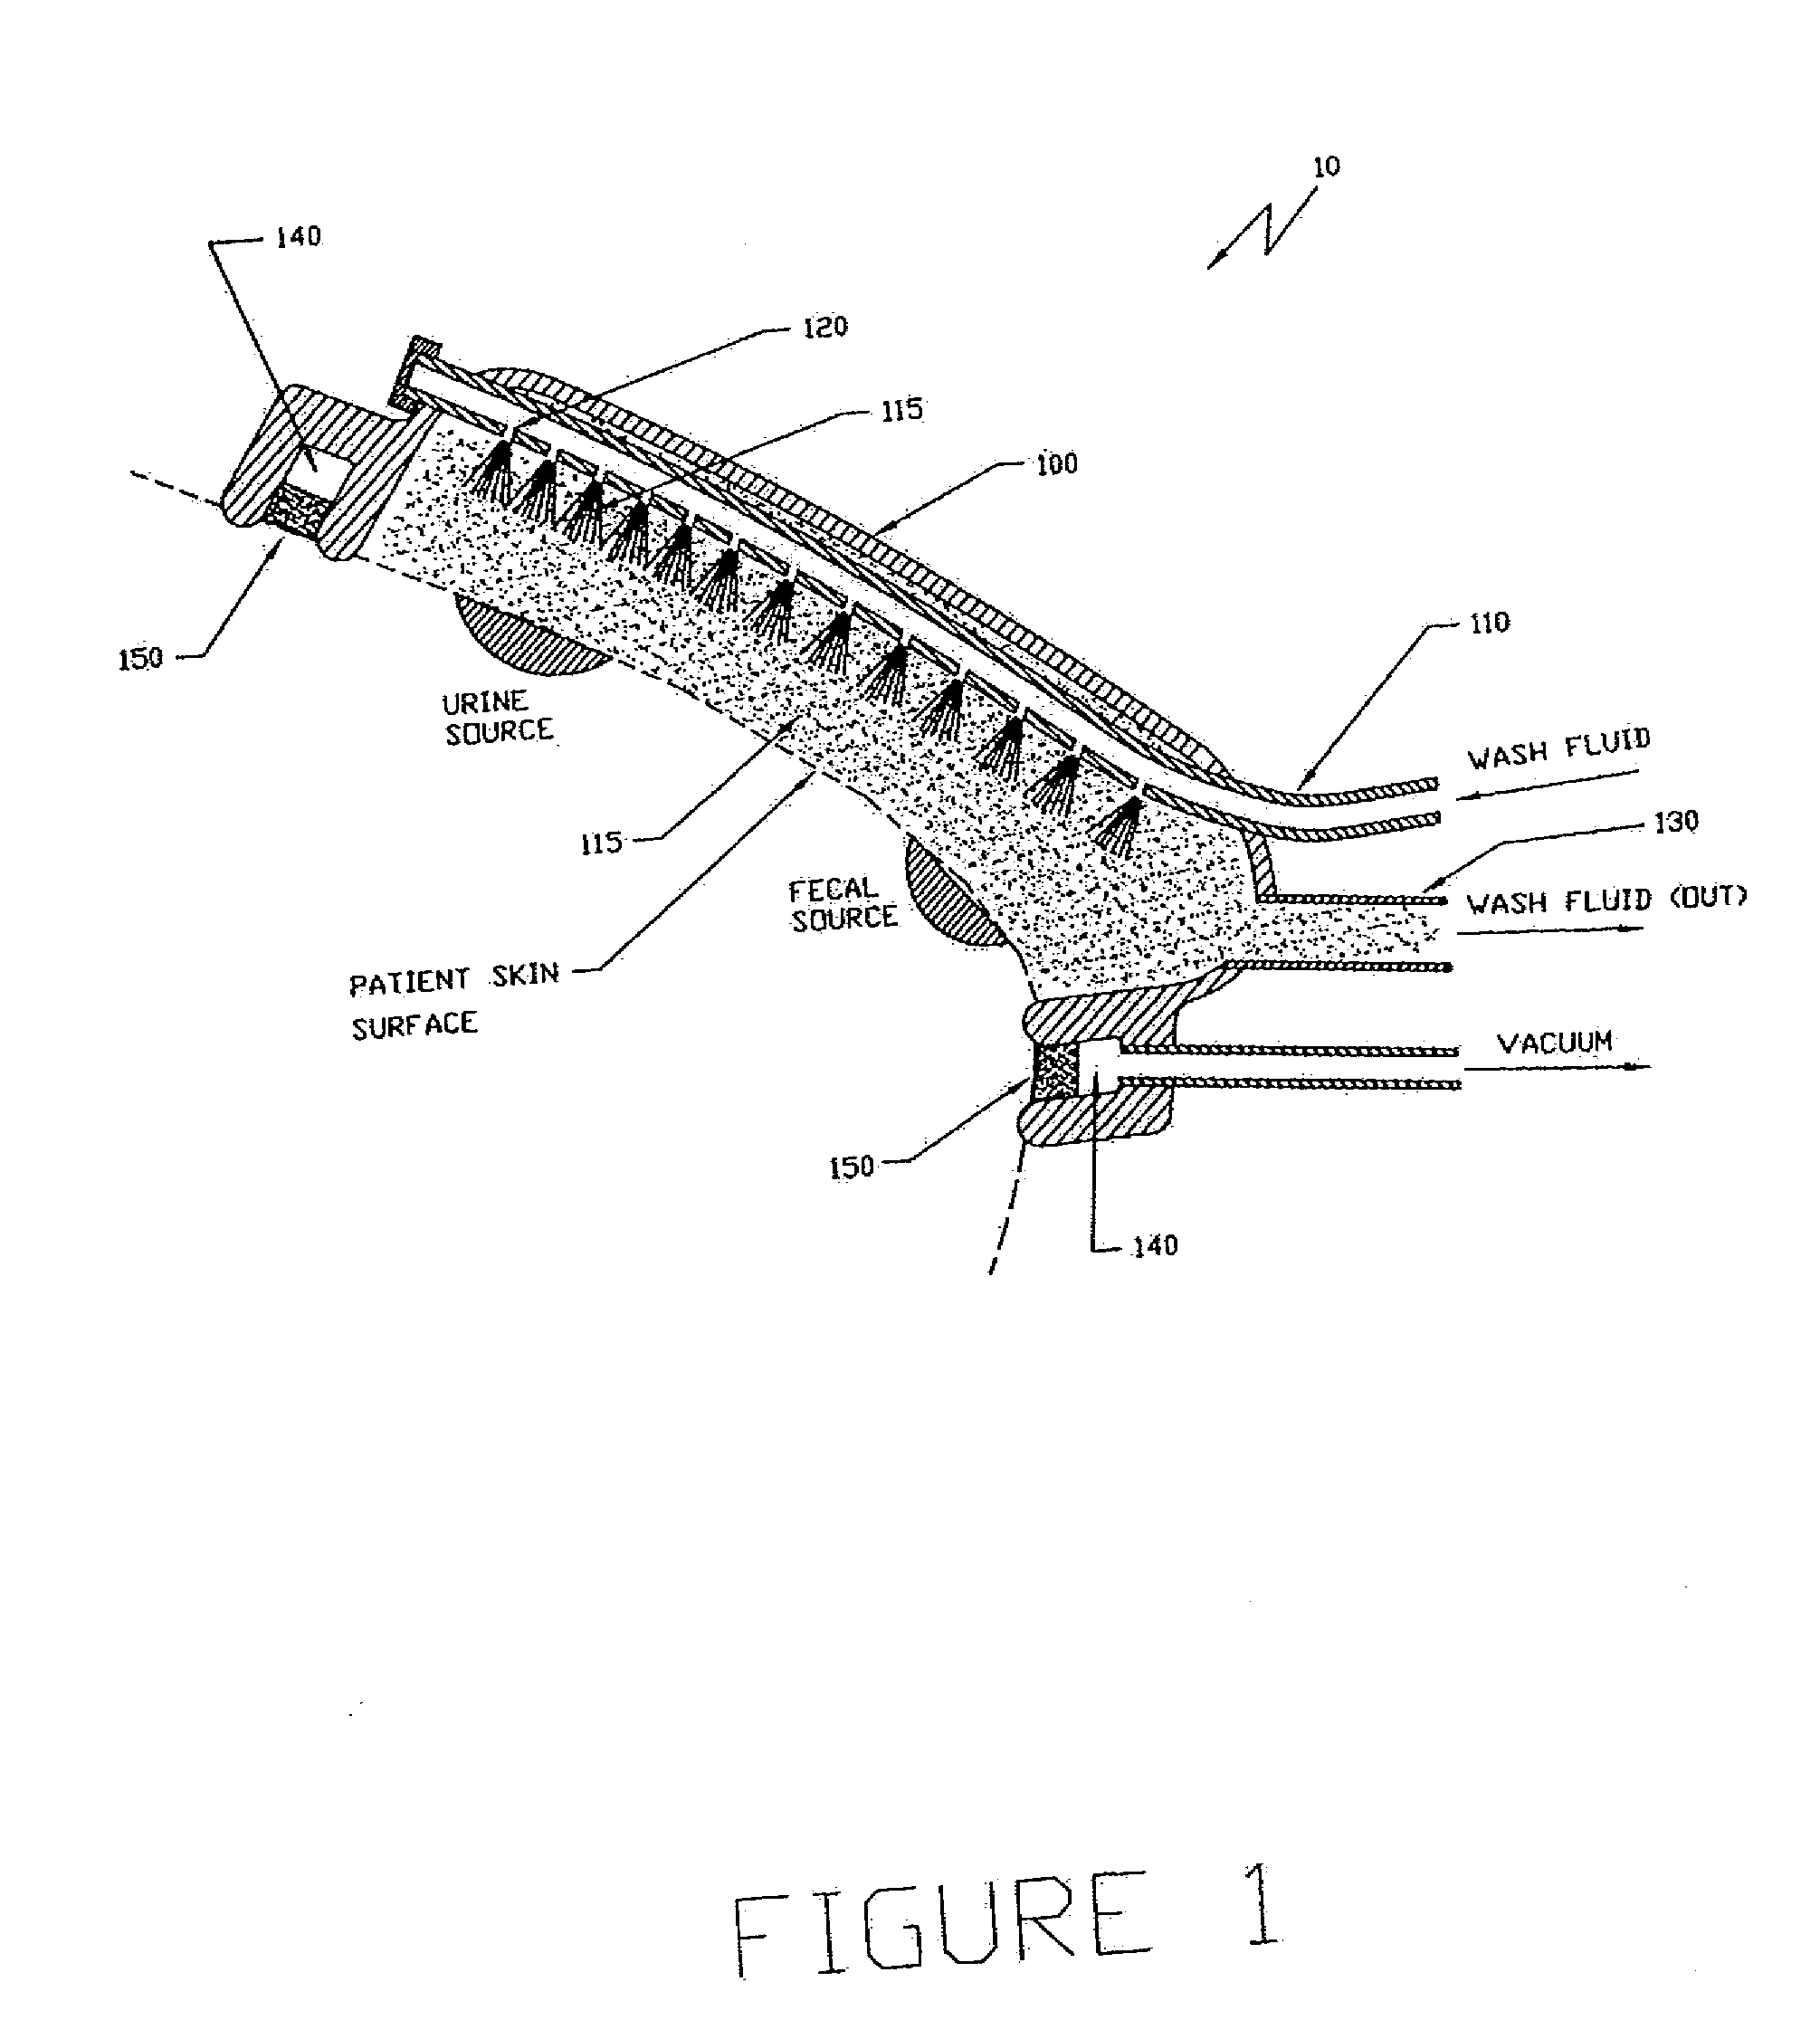 Apparatus and Method for the Removal and Containment of Human Waste Excretion